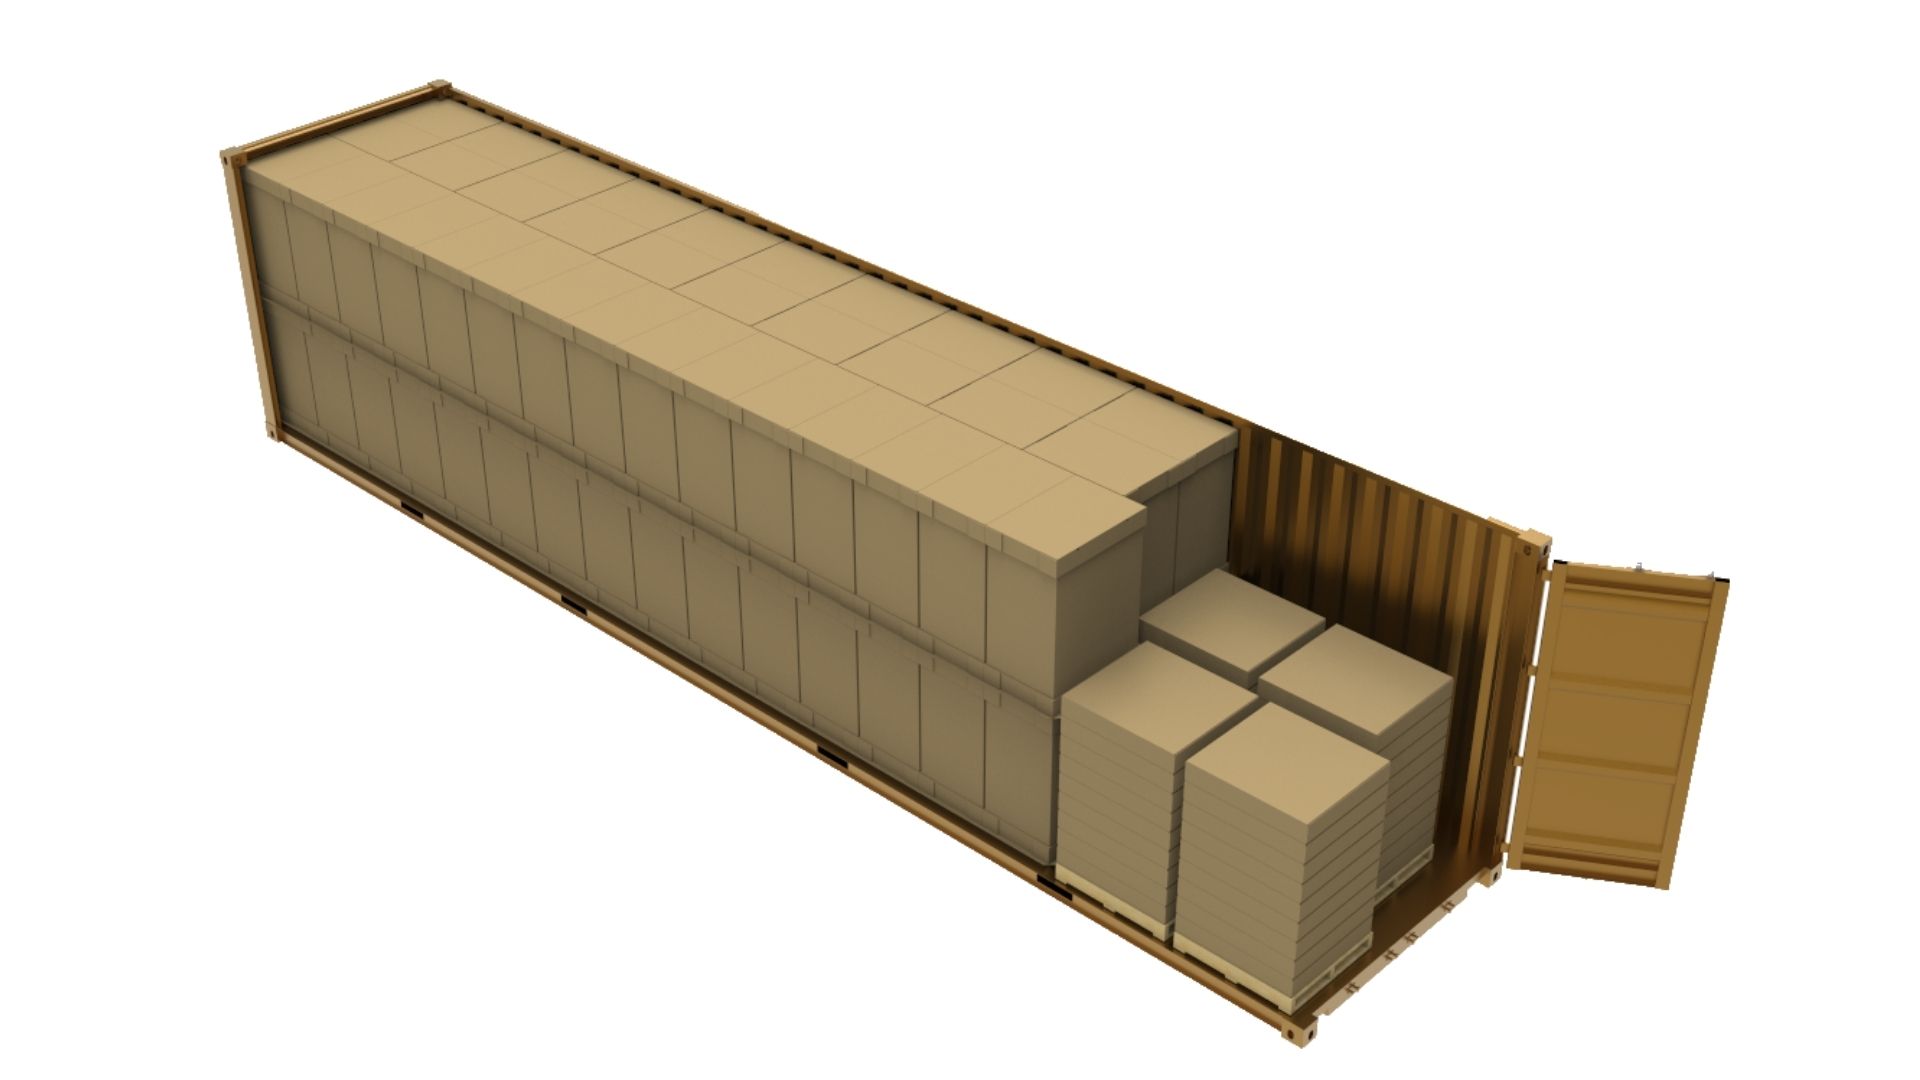 Example of a sustainable container stacking alternative. 